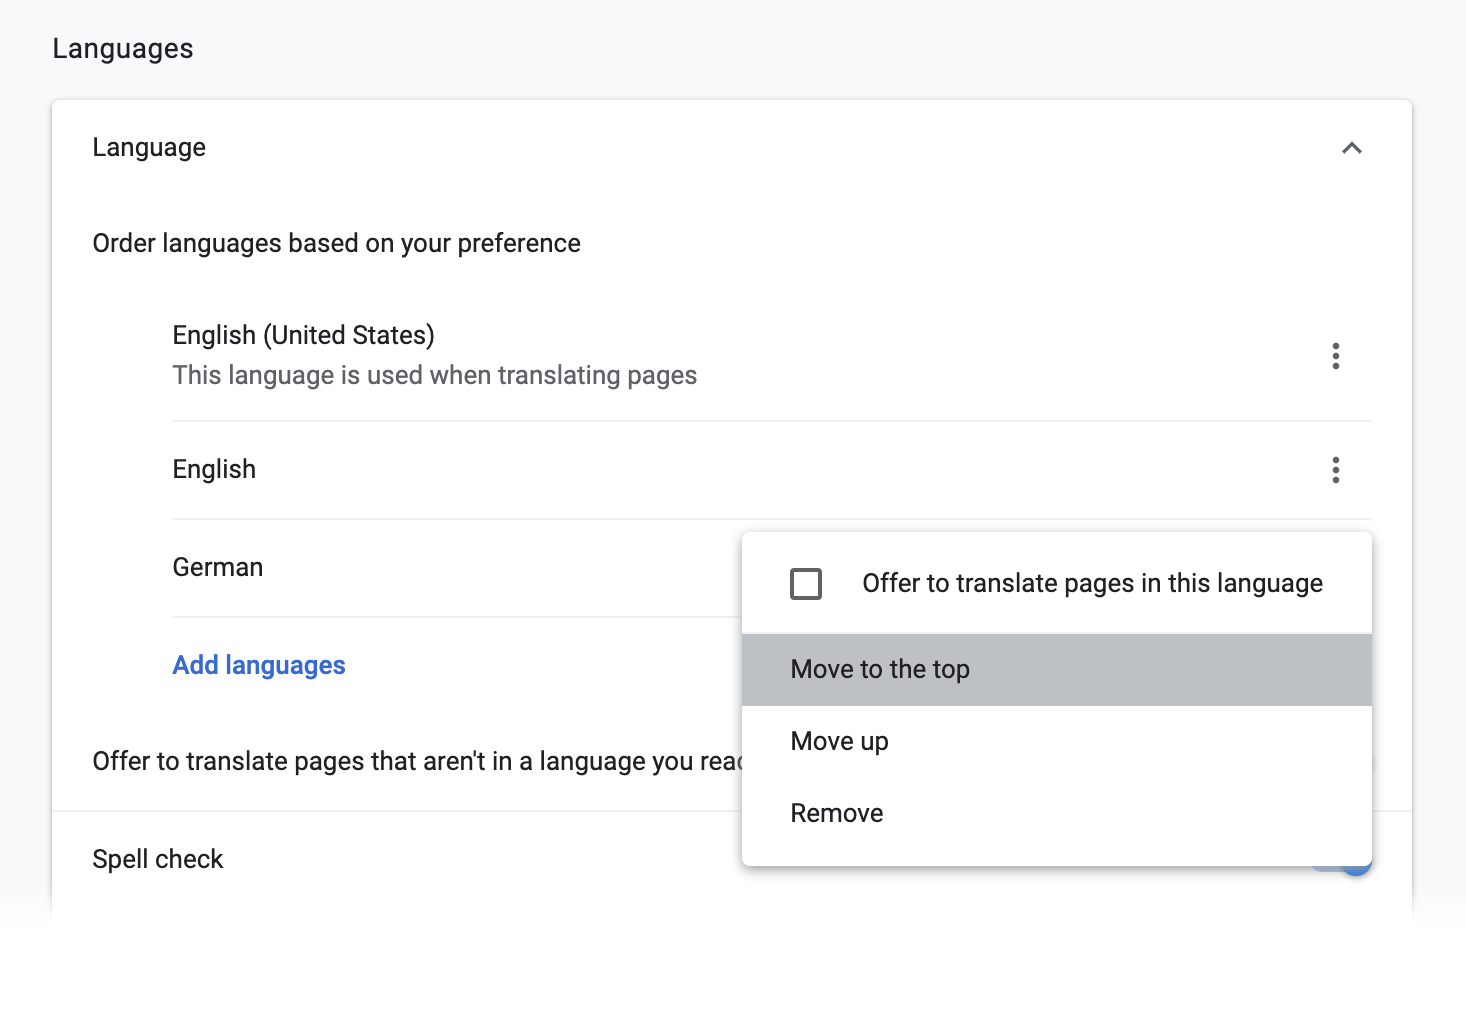 A screenshot of the Google Chrome Language settings. The option Move to the top is selected for one of the listed languages.